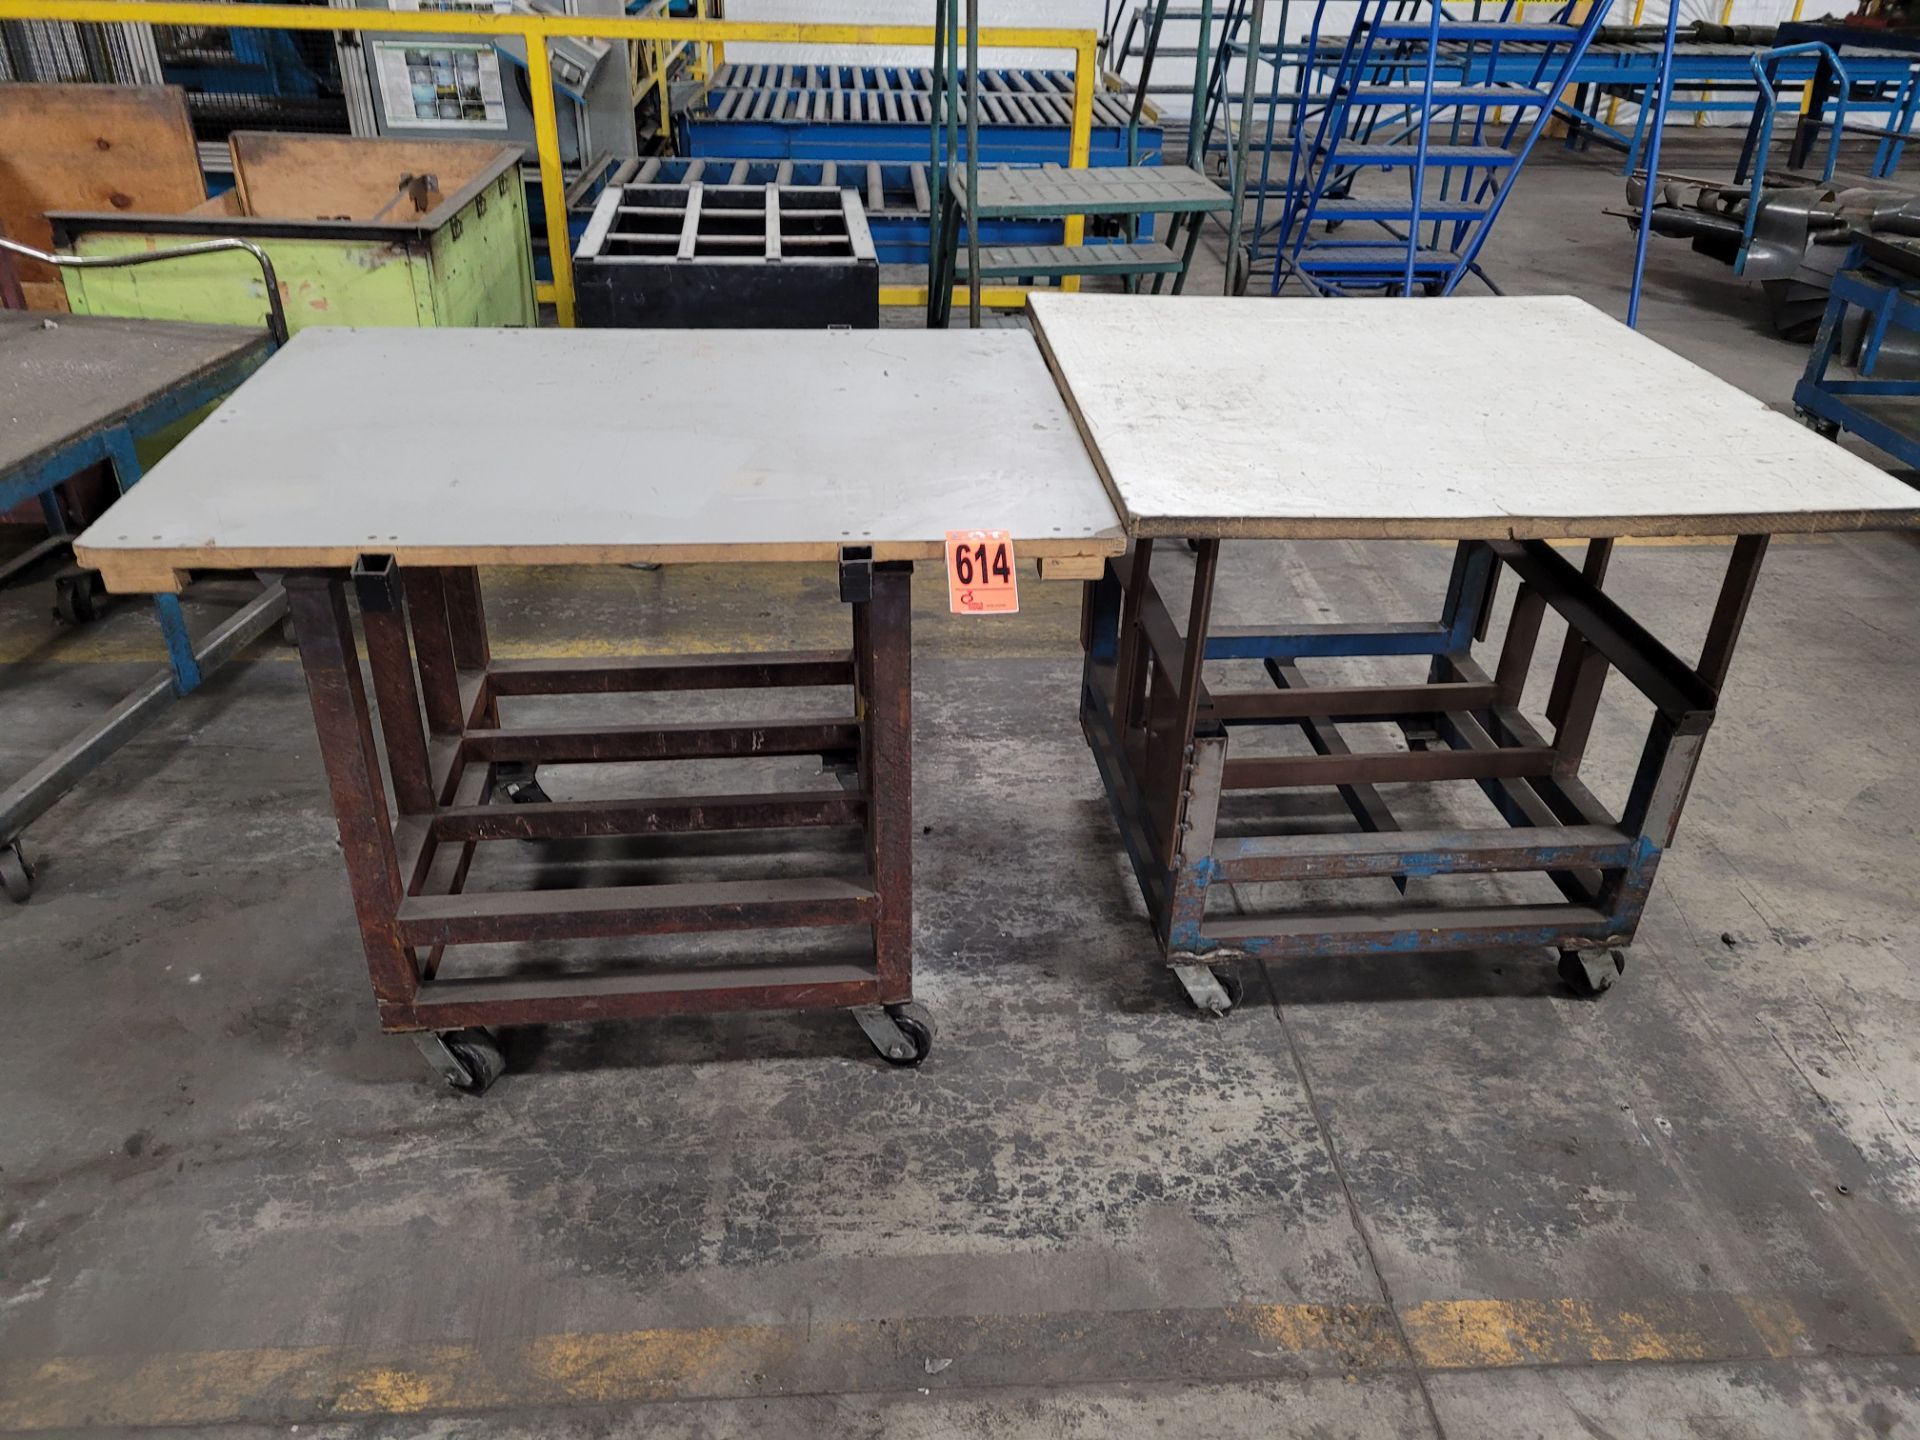 Lot of (2) steel frame, plywood surface mobile workstations on casters